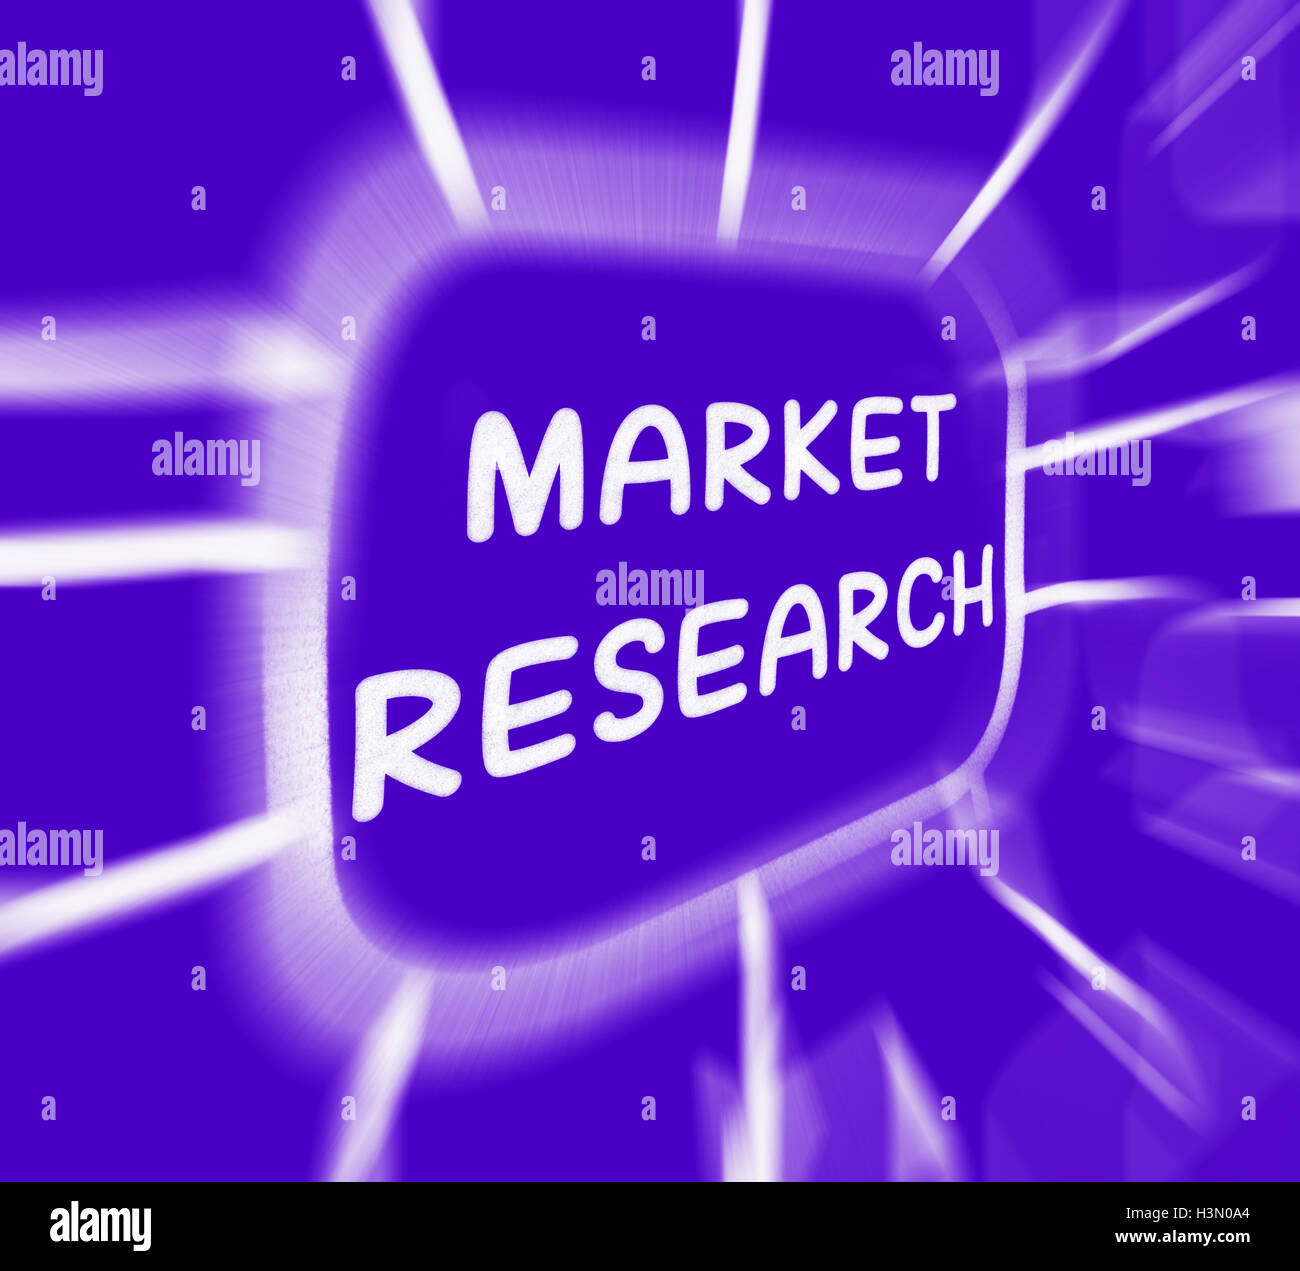 Market Research Diagram Displays Researching Consumer Demand And Stock Photo